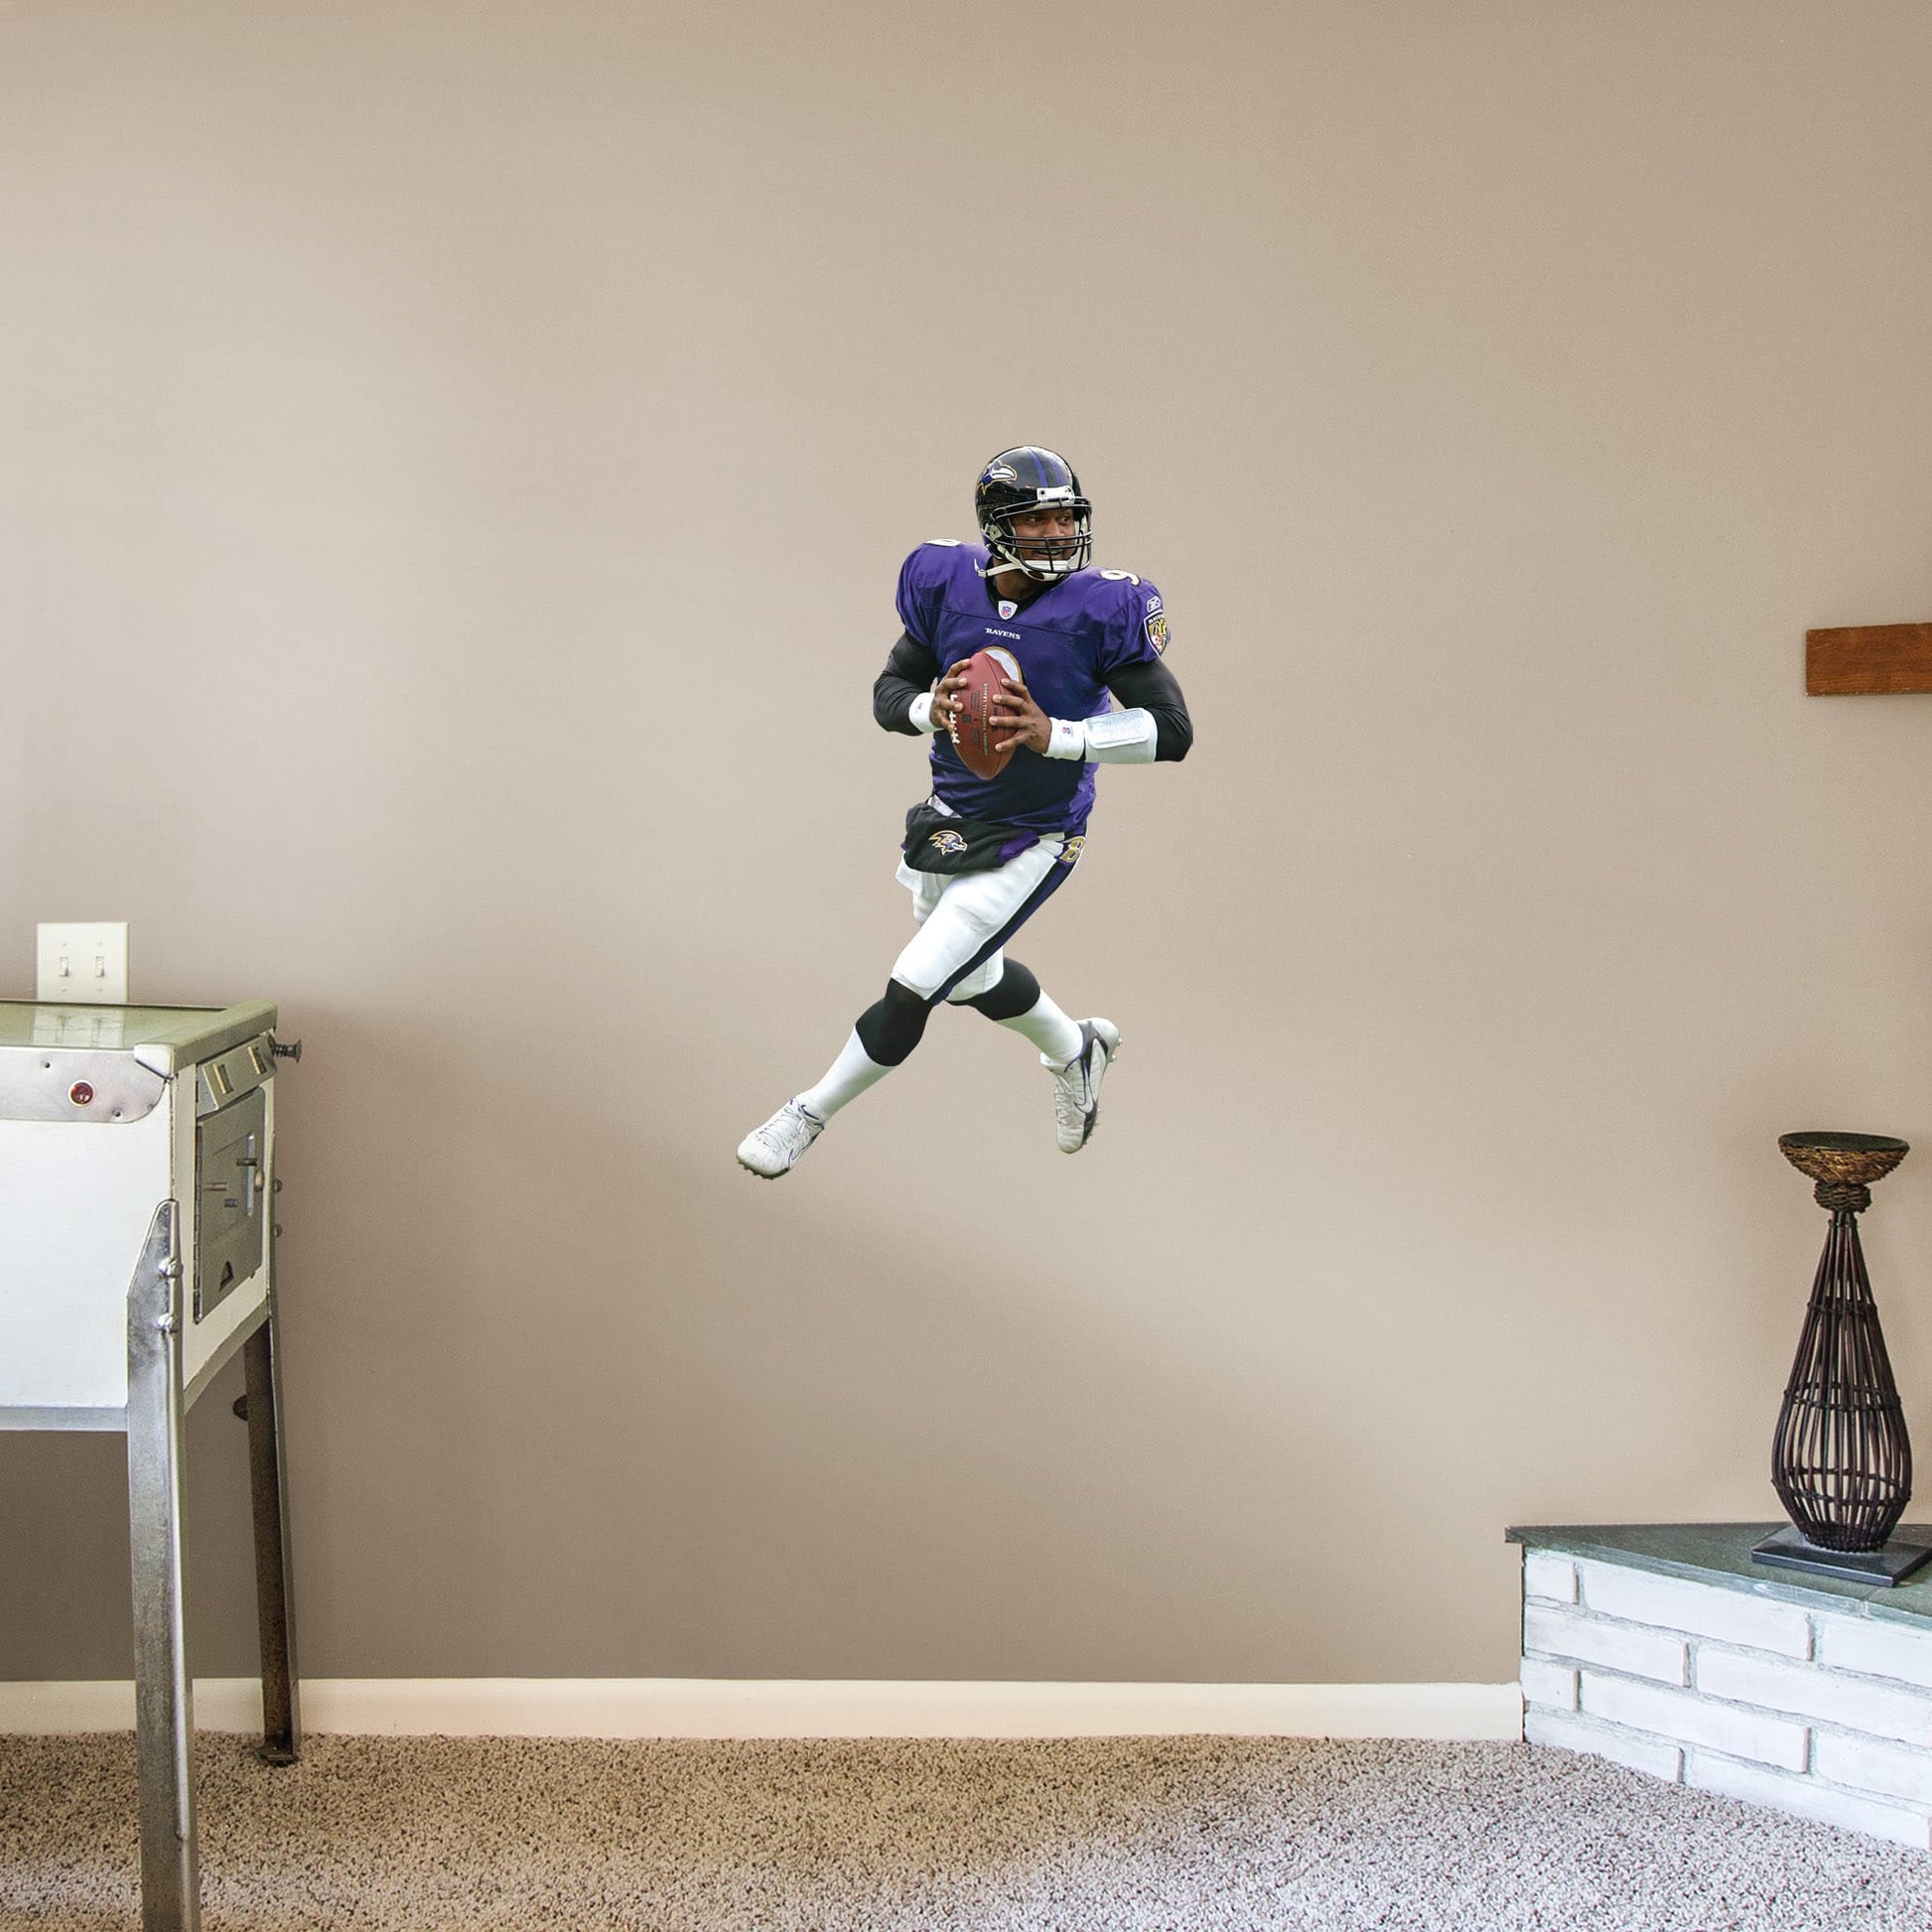 X-Large Athlete + 2 Decals (24"W x 38.5"H) Bring the action of the NFL into your home with a wall decal of Steve McNair! High quality, durable, and tear resistant, you'll be able to stick and move it as many times as you want to create the ultimate football experience in any room!